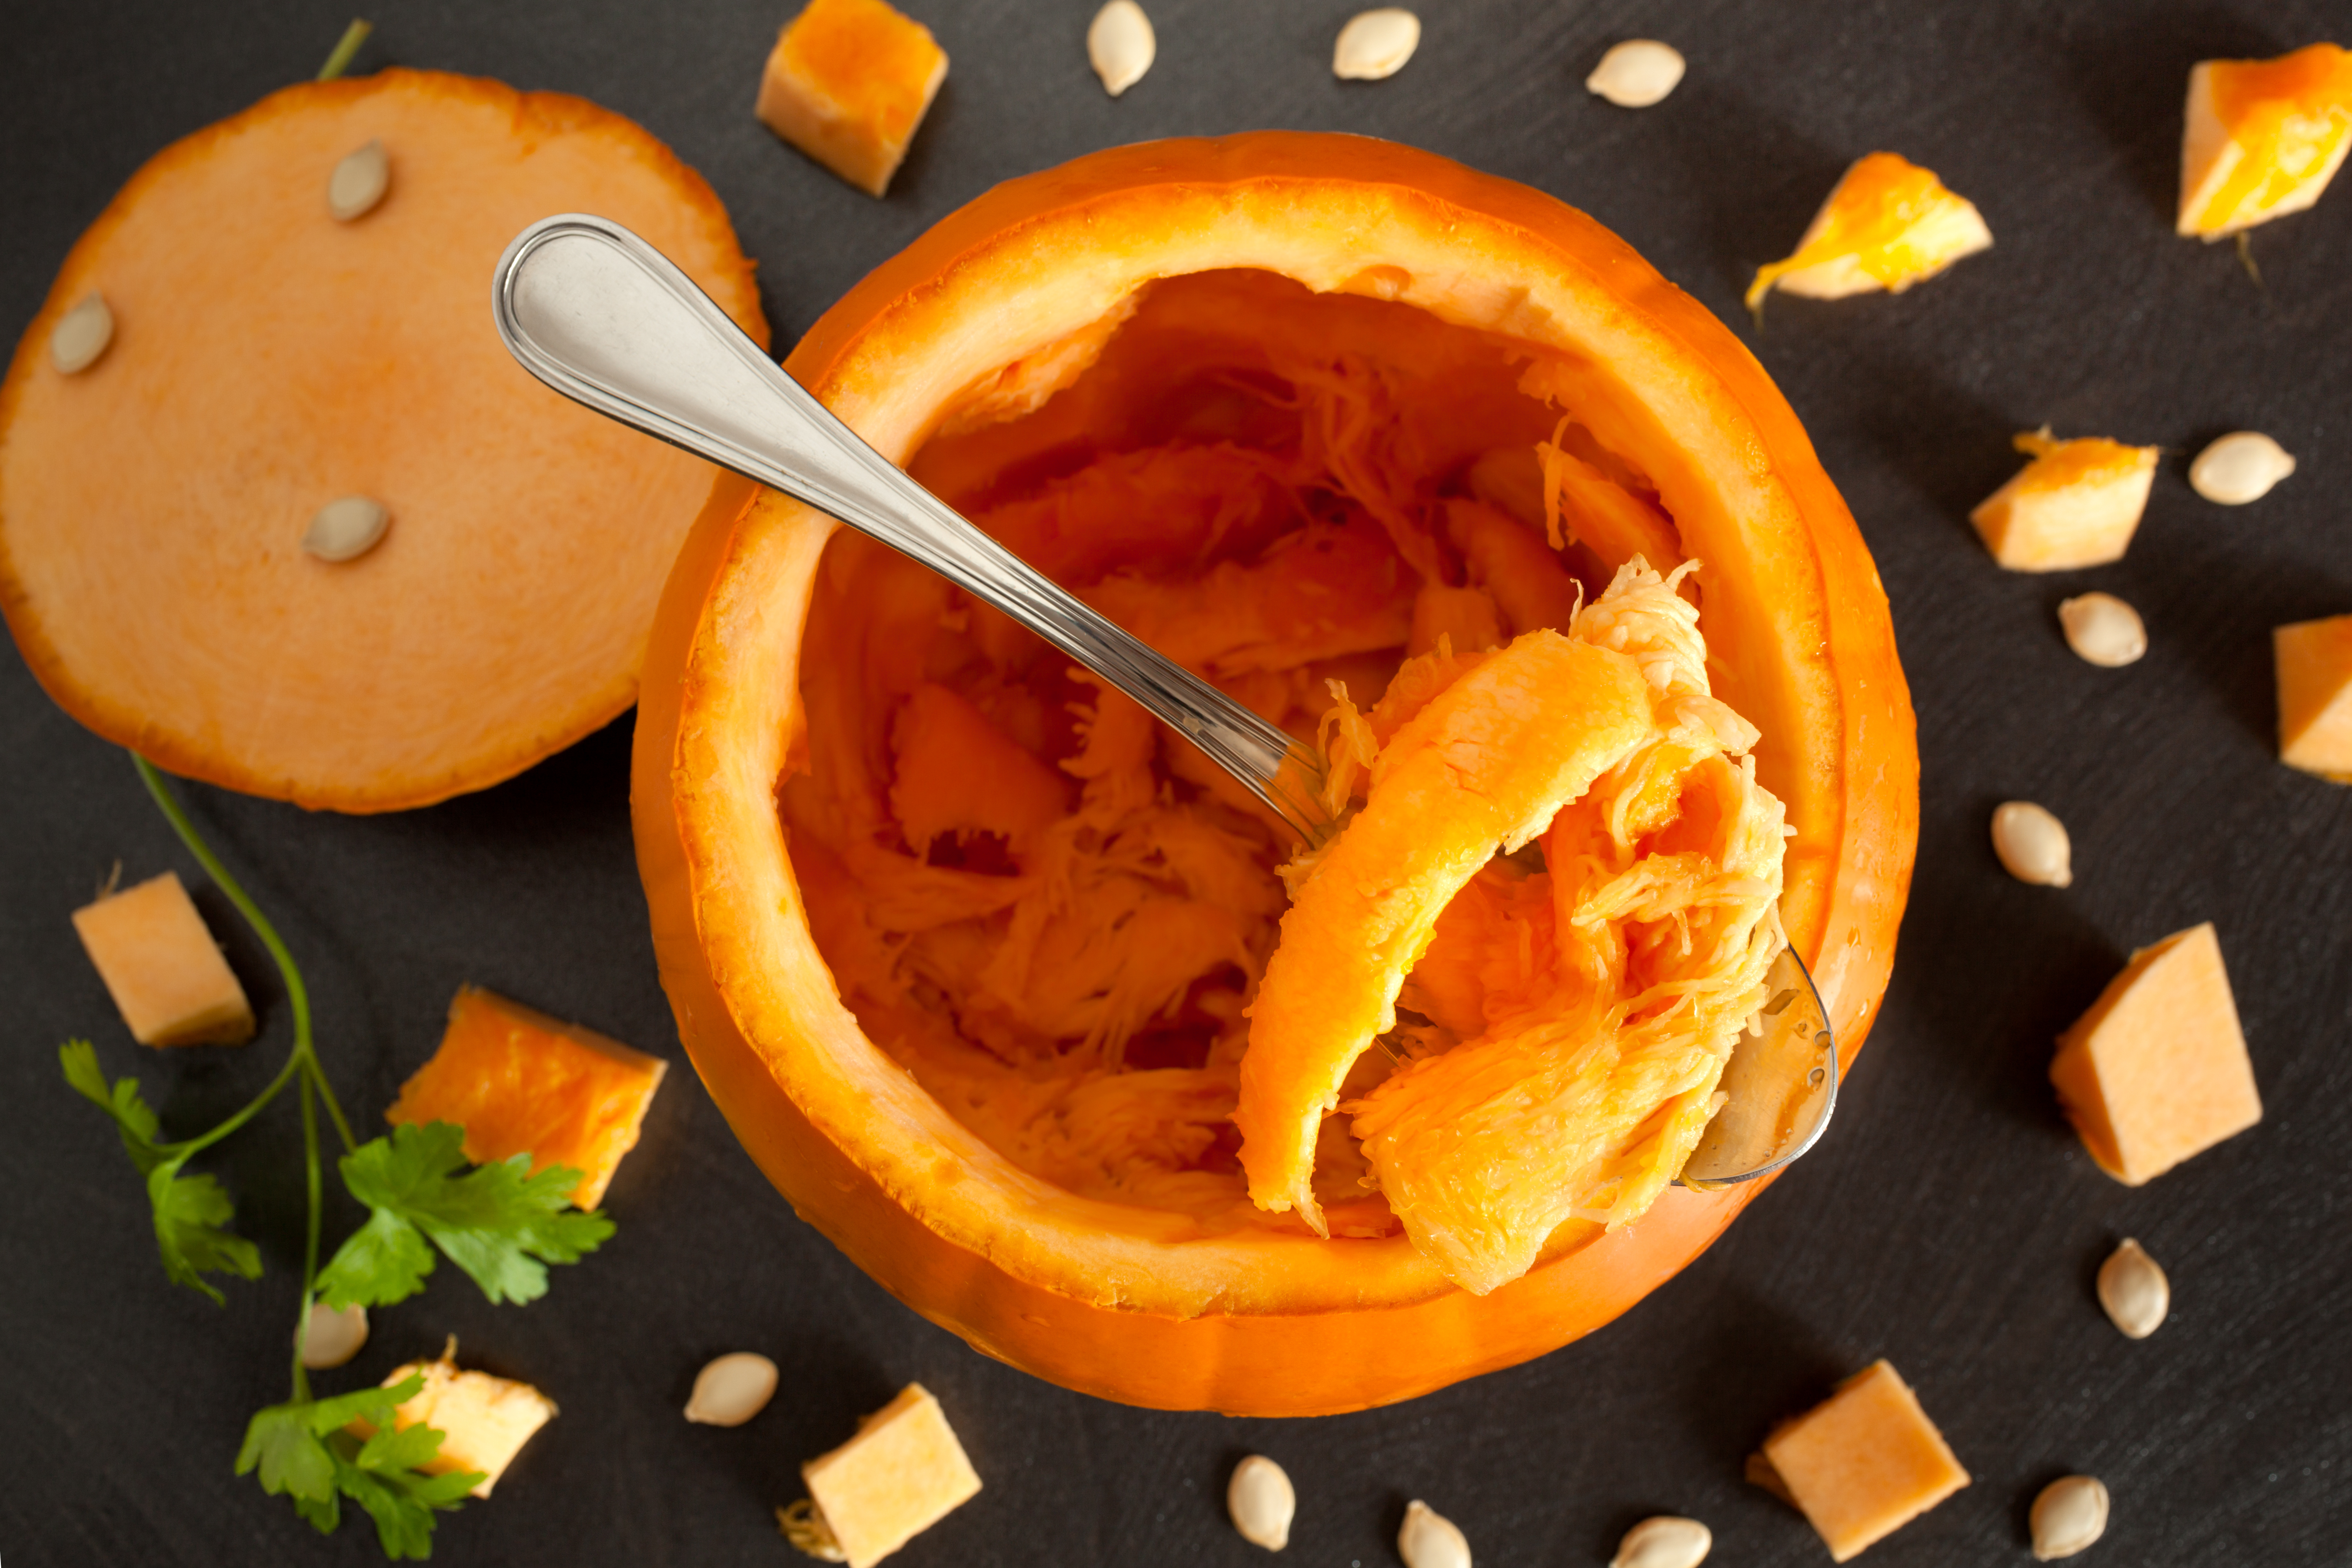 Ask a Nutritionist: The Health Benefits of Pumpkins.